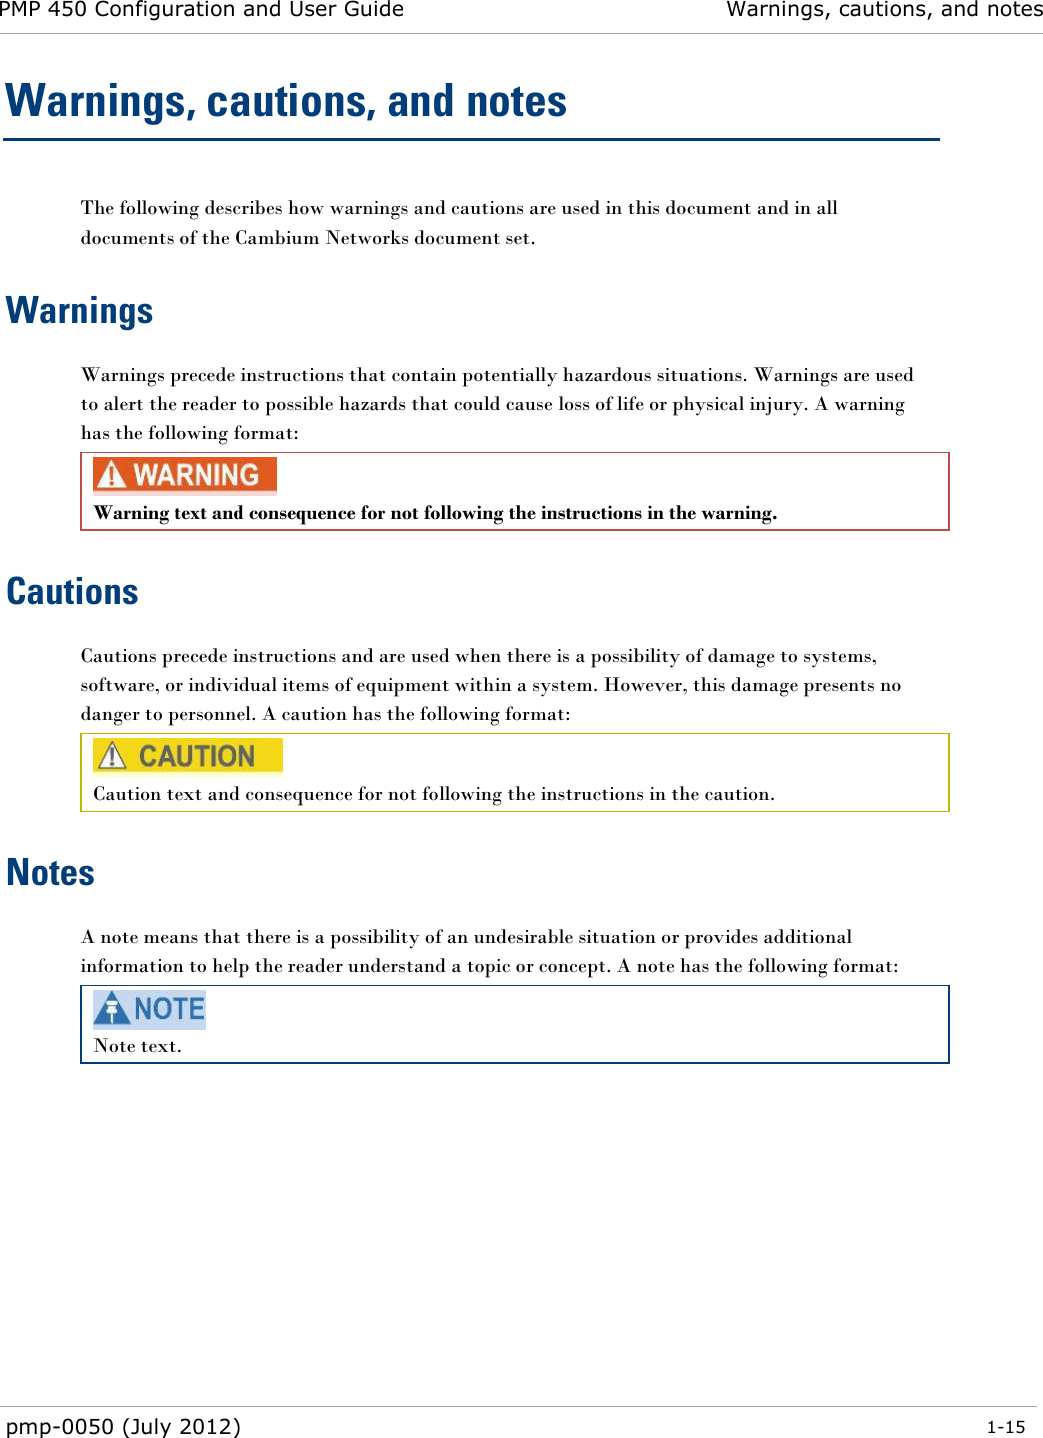 PMP 450 Configuration and User Guide Warnings, cautions, and notes  pmp-0050 (July 2012)  1-15  Warnings, cautions, and notes The following describes how warnings and cautions are used in this document and in all documents of the Cambium Networks document set. Warnings Warnings precede instructions that contain potentially hazardous situations. Warnings are used to alert the reader to possible hazards that could cause loss of life or physical injury. A warning has the following format:  Warning text and consequence for not following the instructions in the warning. Cautions Cautions precede instructions and are used when there is a possibility of damage to systems, software, or individual items of equipment within a system. However, this damage presents no danger to personnel. A caution has the following format:  Caution text and consequence for not following the instructions in the caution. Notes A note means that there is a possibility of an undesirable situation or provides additional information to help the reader understand a topic or concept. A note has the following format:  Note text. 